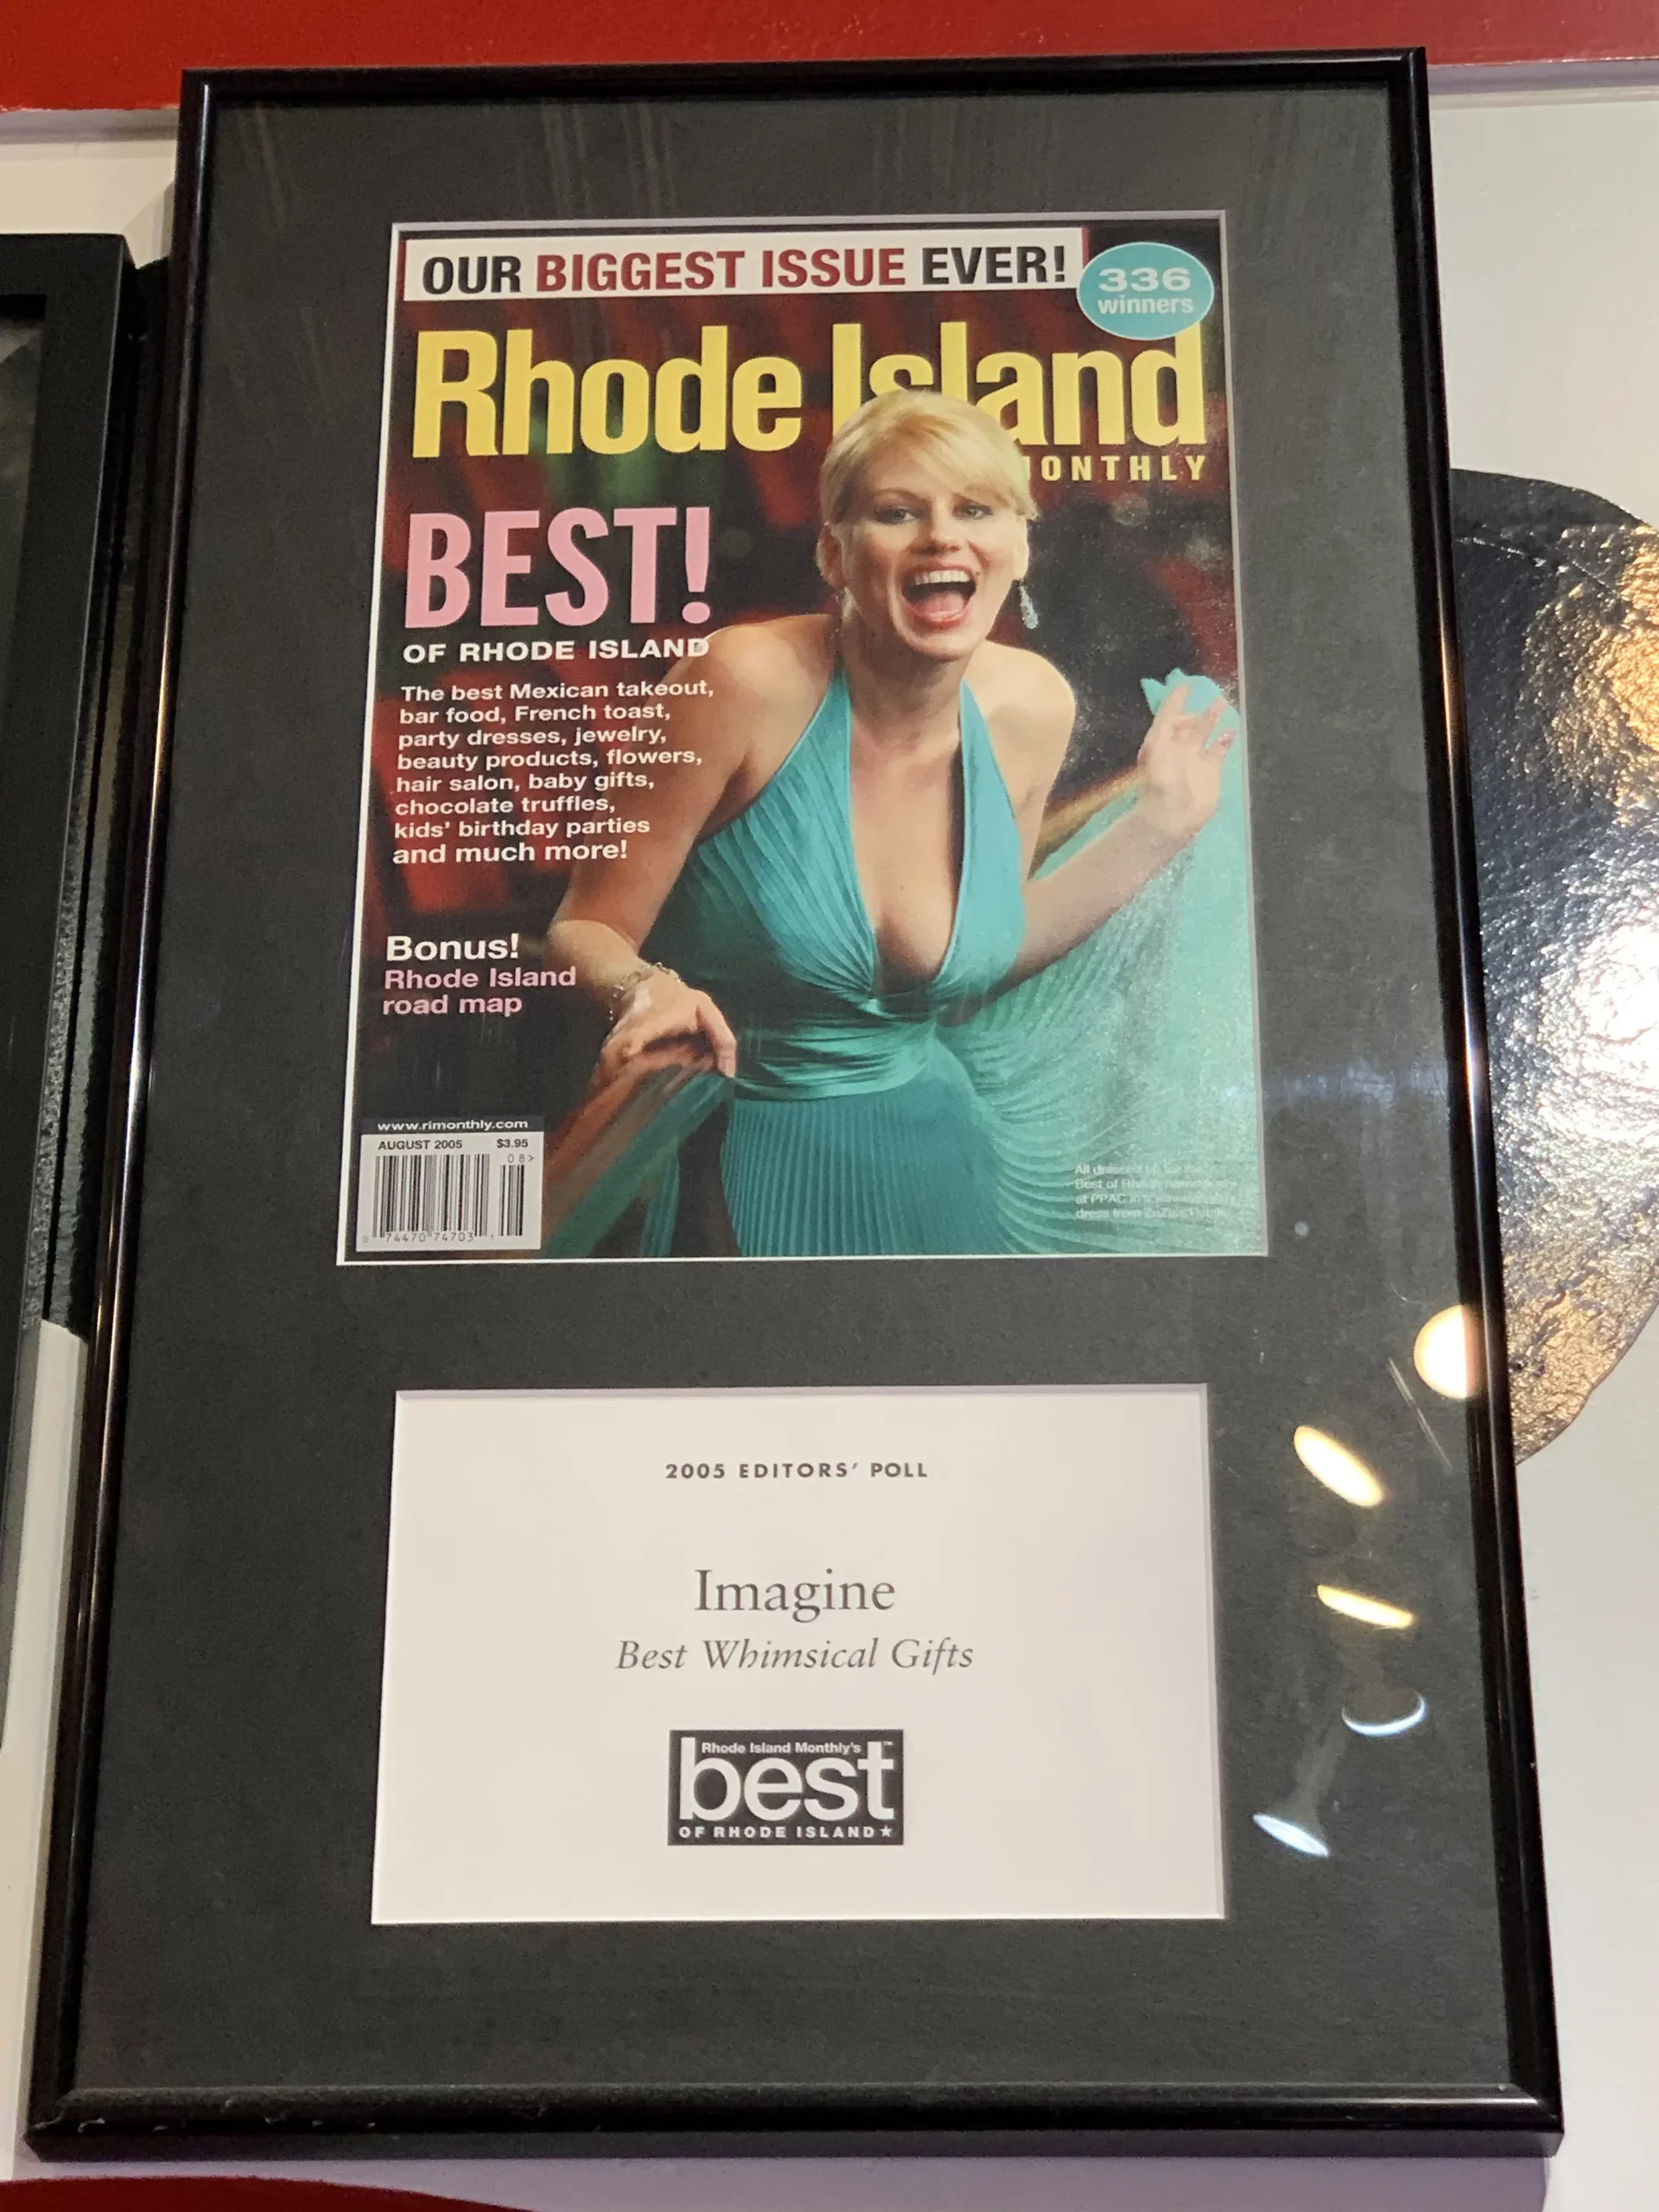 Award stating that Imagine Gift Store is the recipient of the 2005 Readers' Poll Best of Rhode Island award.